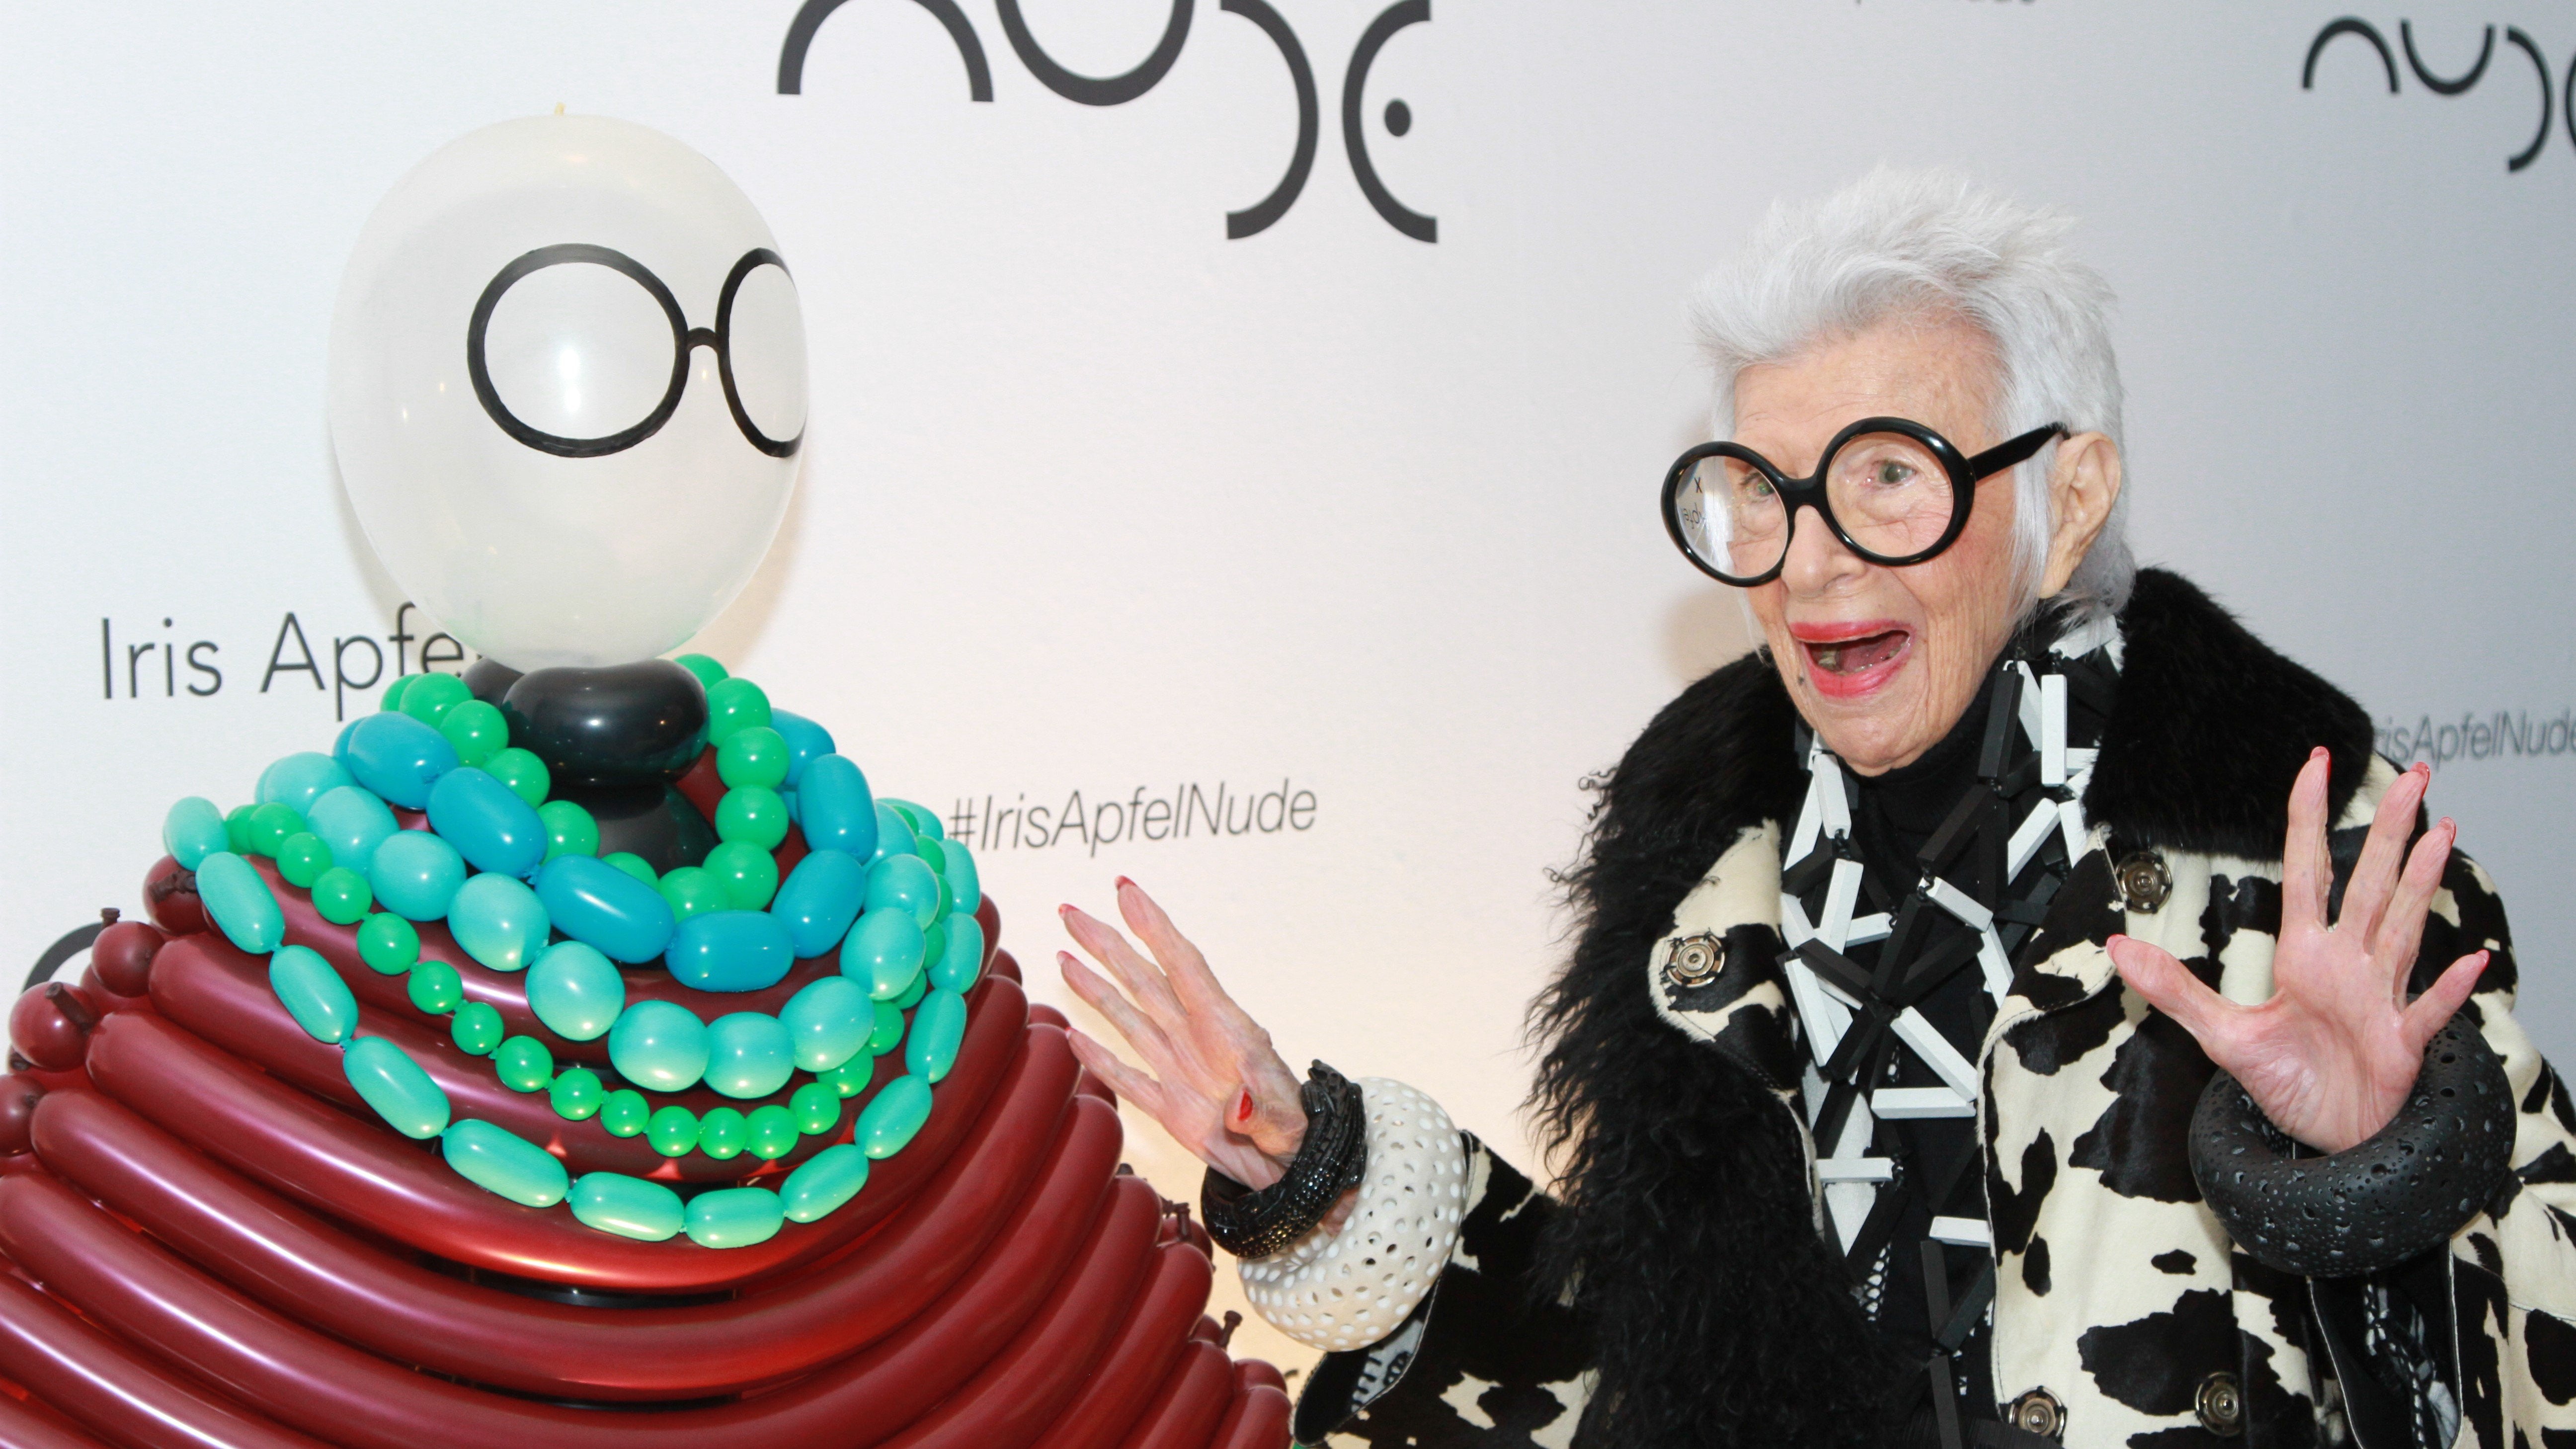 Iris Apfel X NUDE - The launch event in NYC